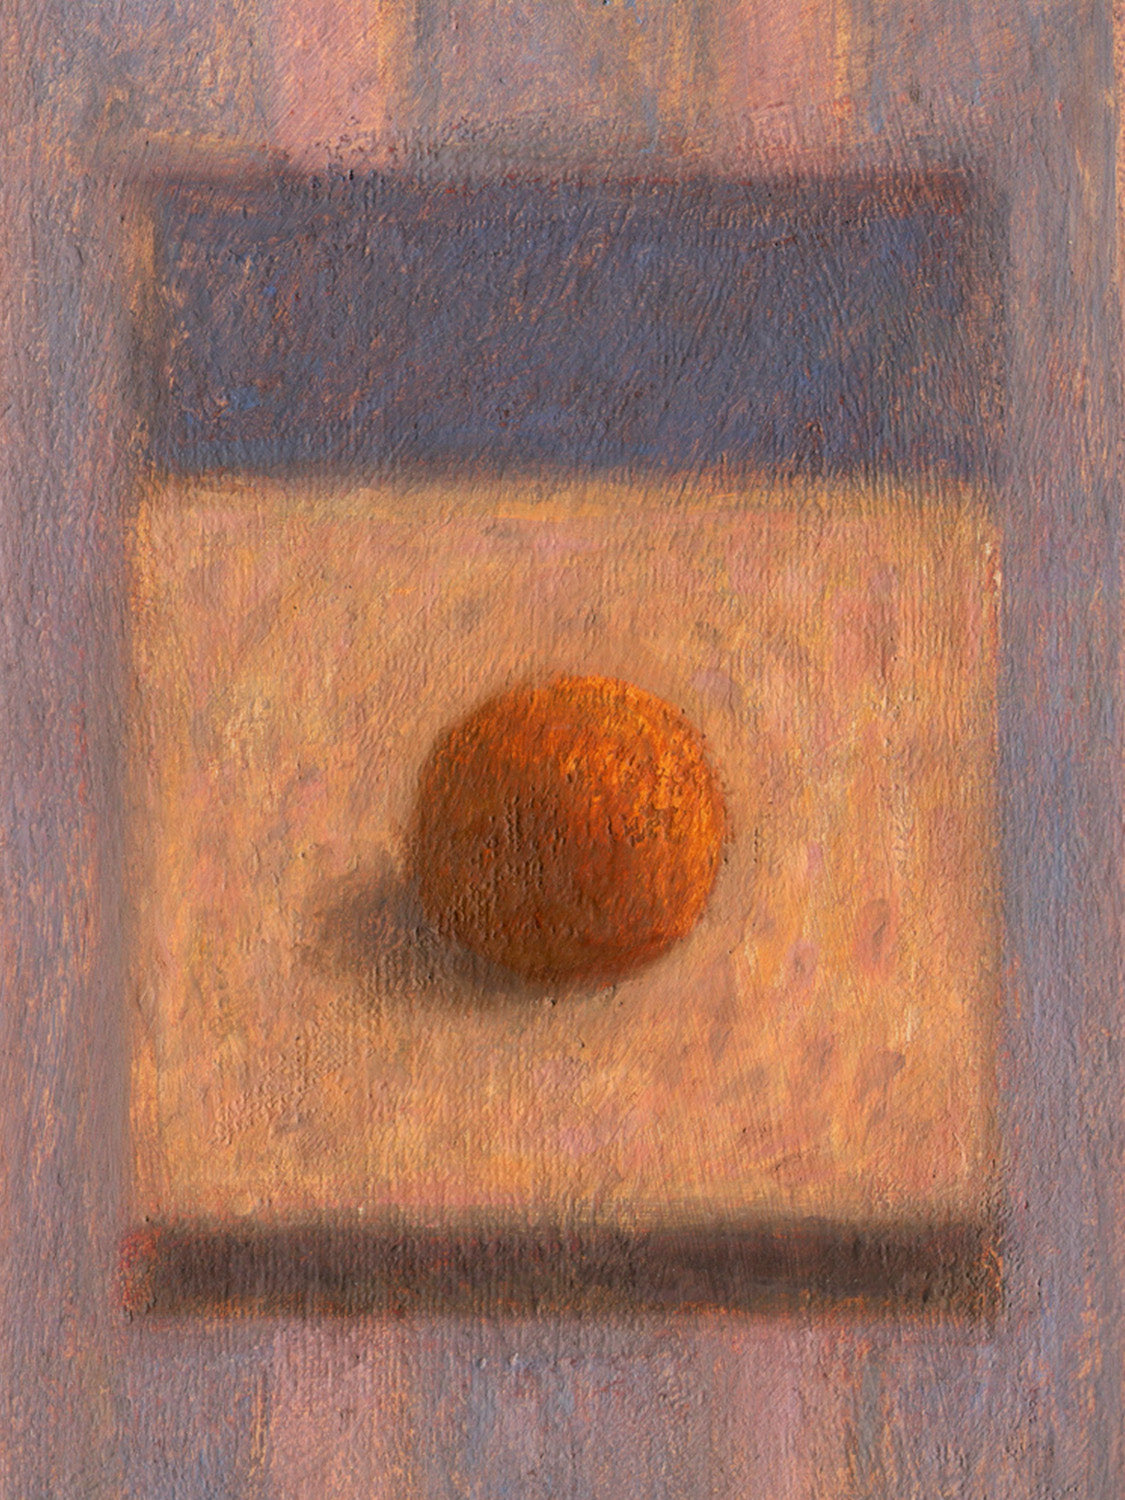 Painting of an Orange on a Wall #1